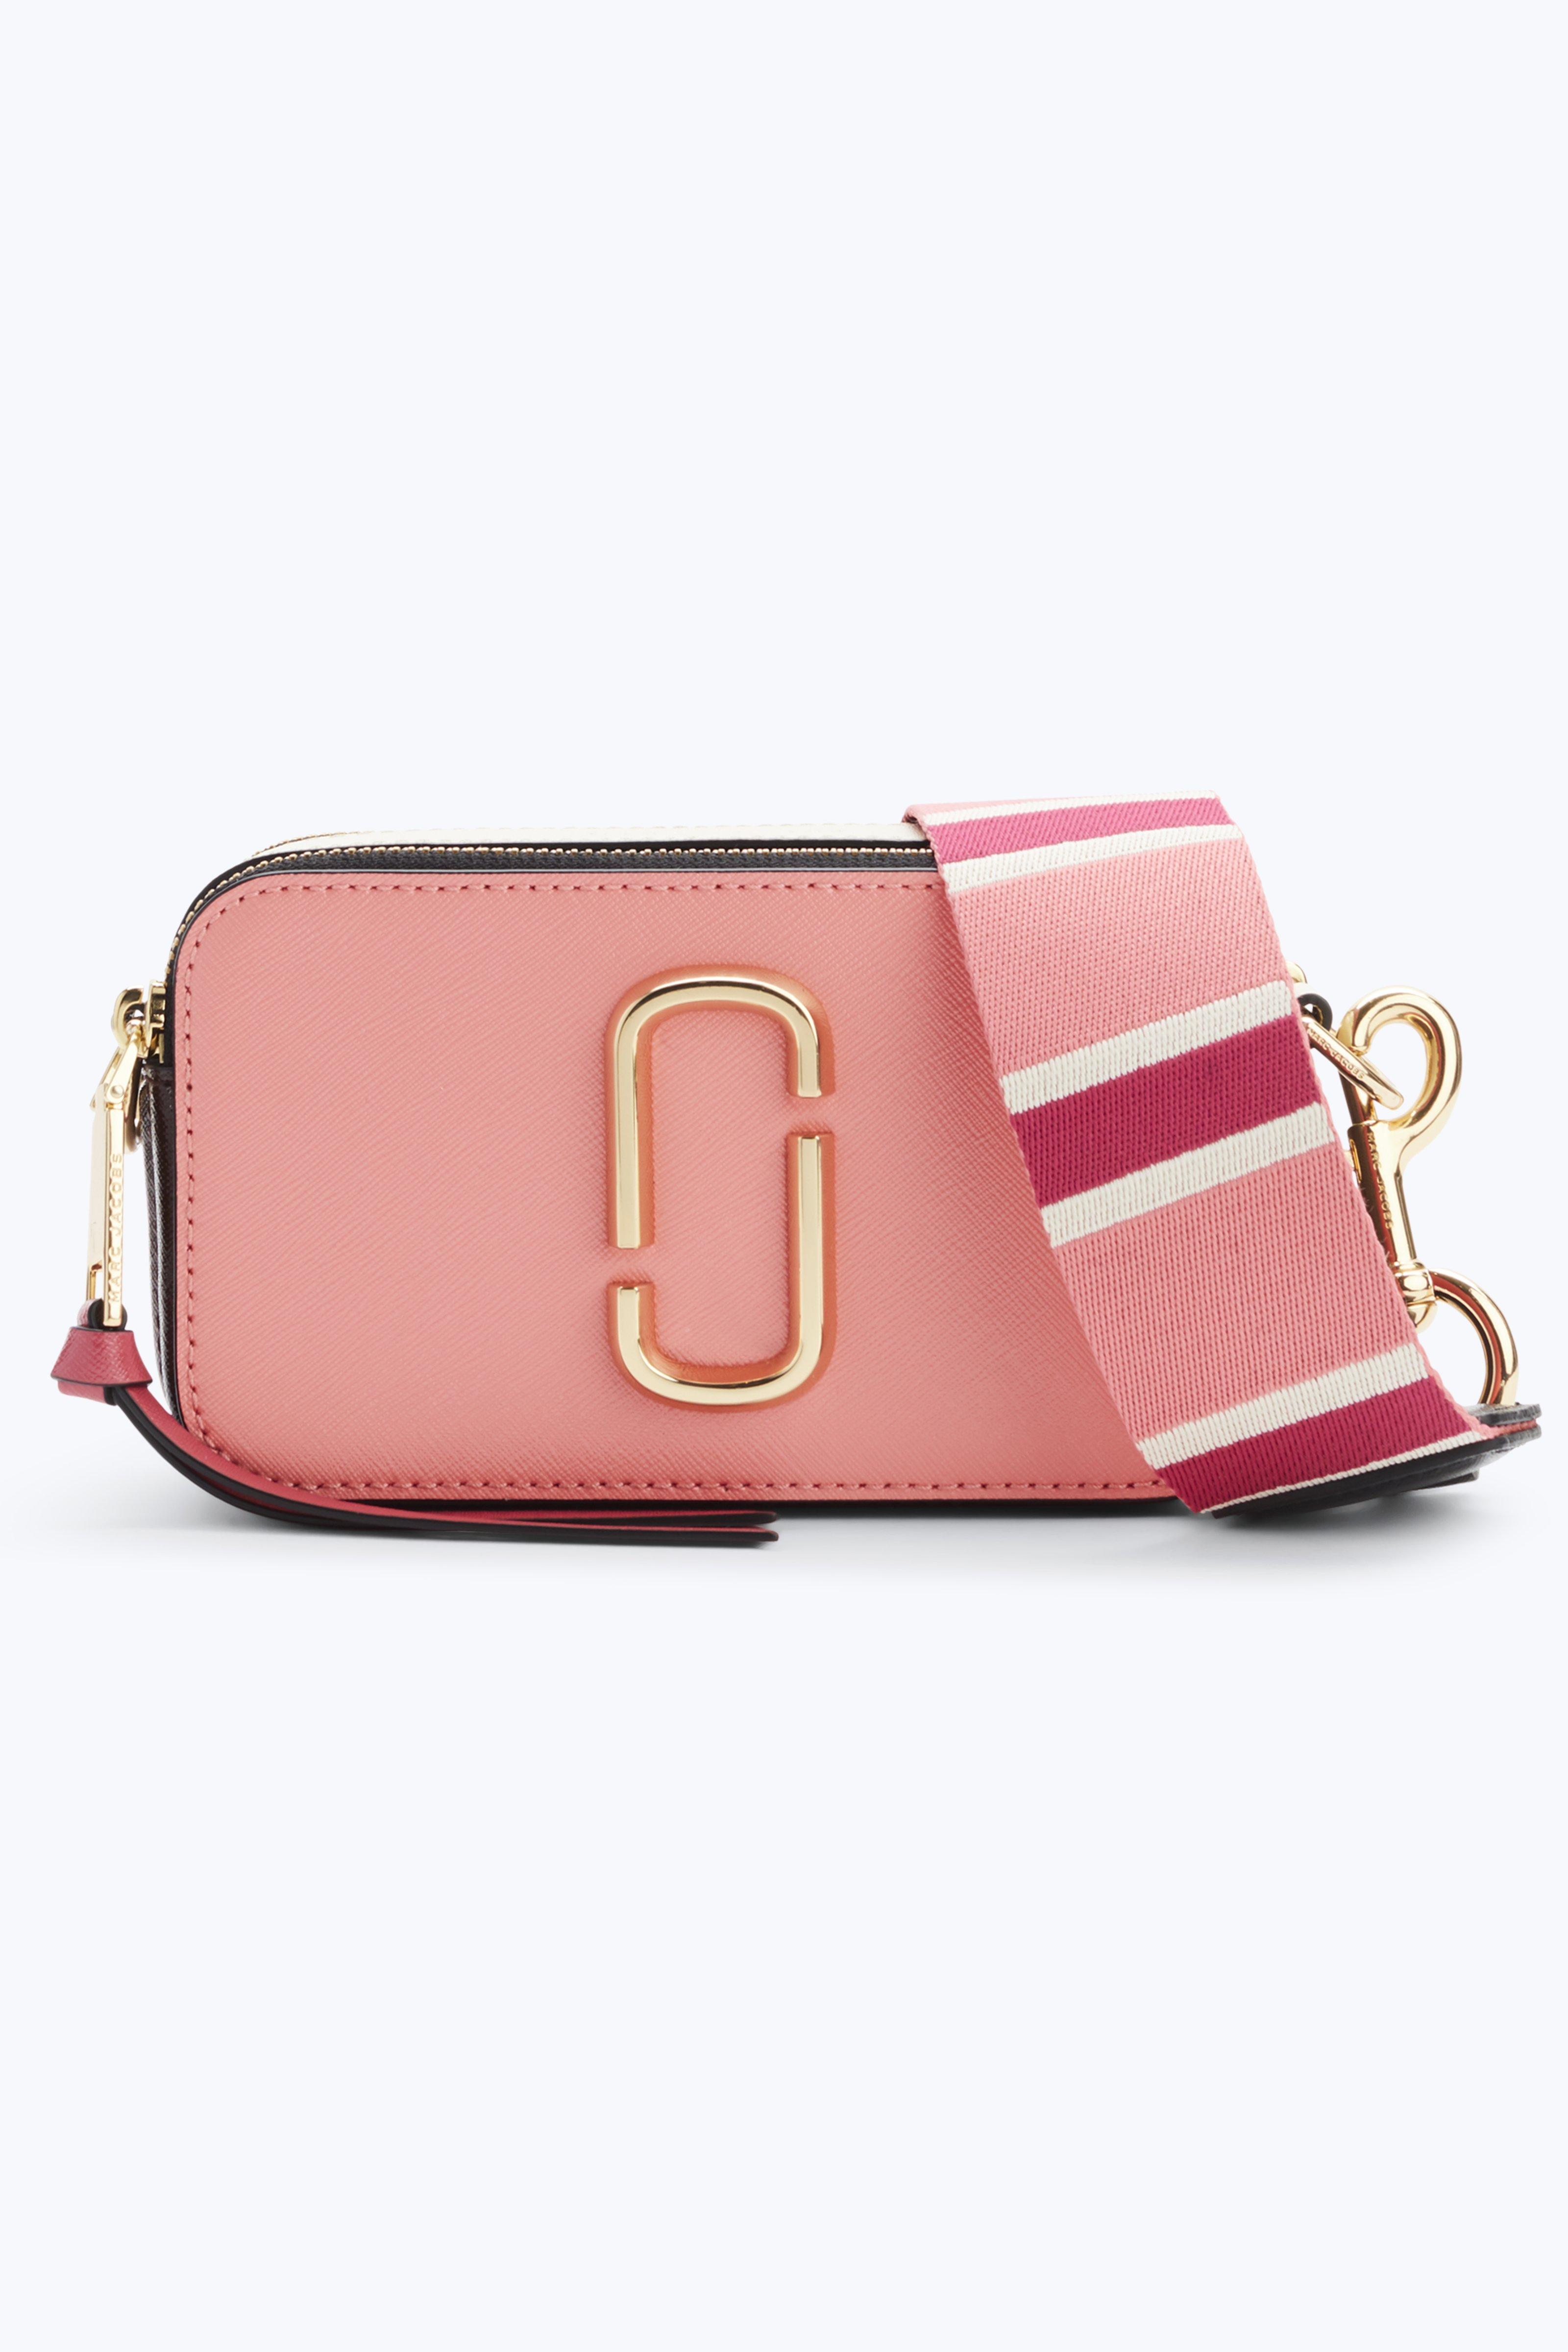 Marc Jacobs Snapshot Small Camera Bag In Coral Multi | ModeSens